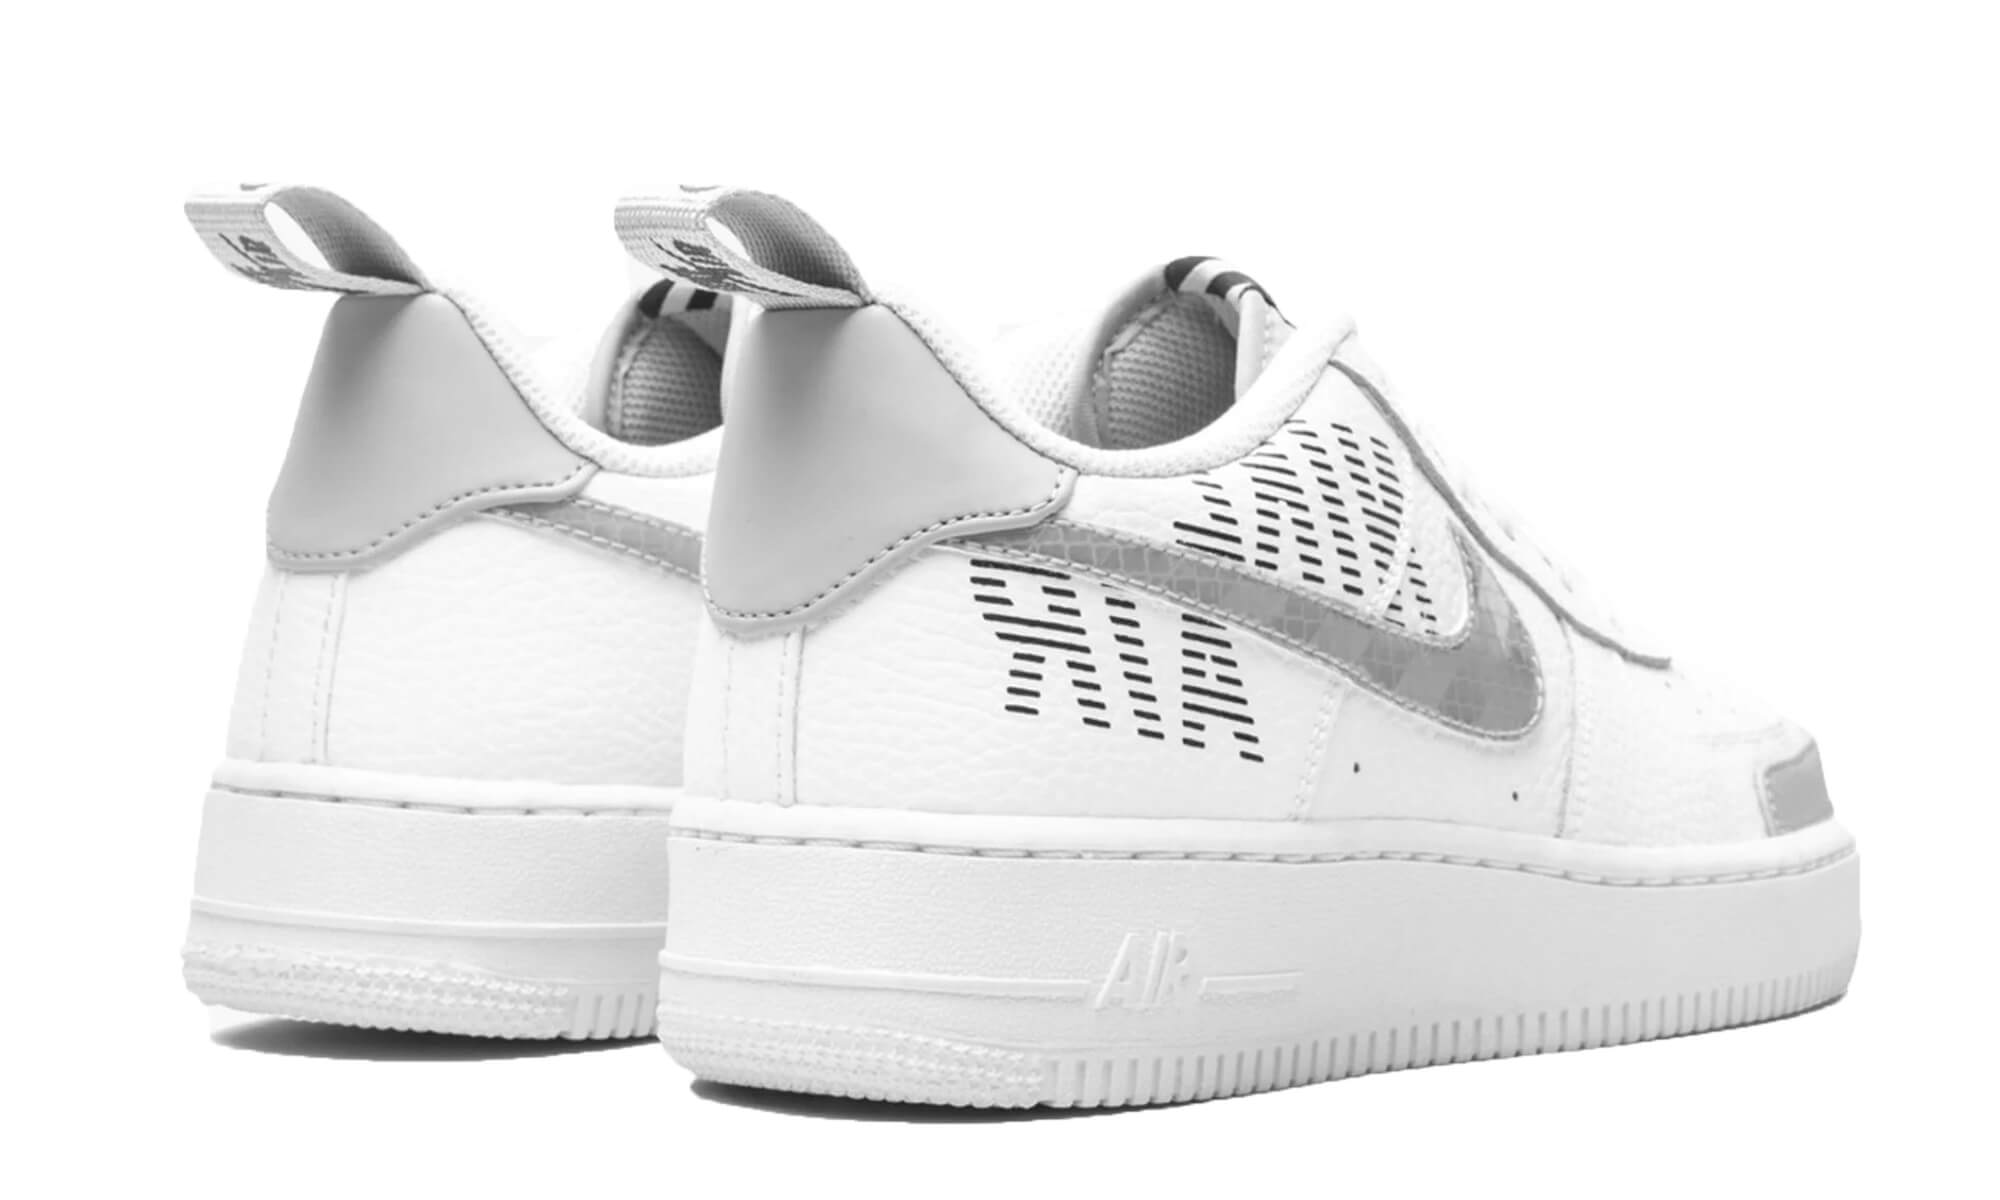 Nike Air Force 1 LV8 2 'White/Wolf Grey'